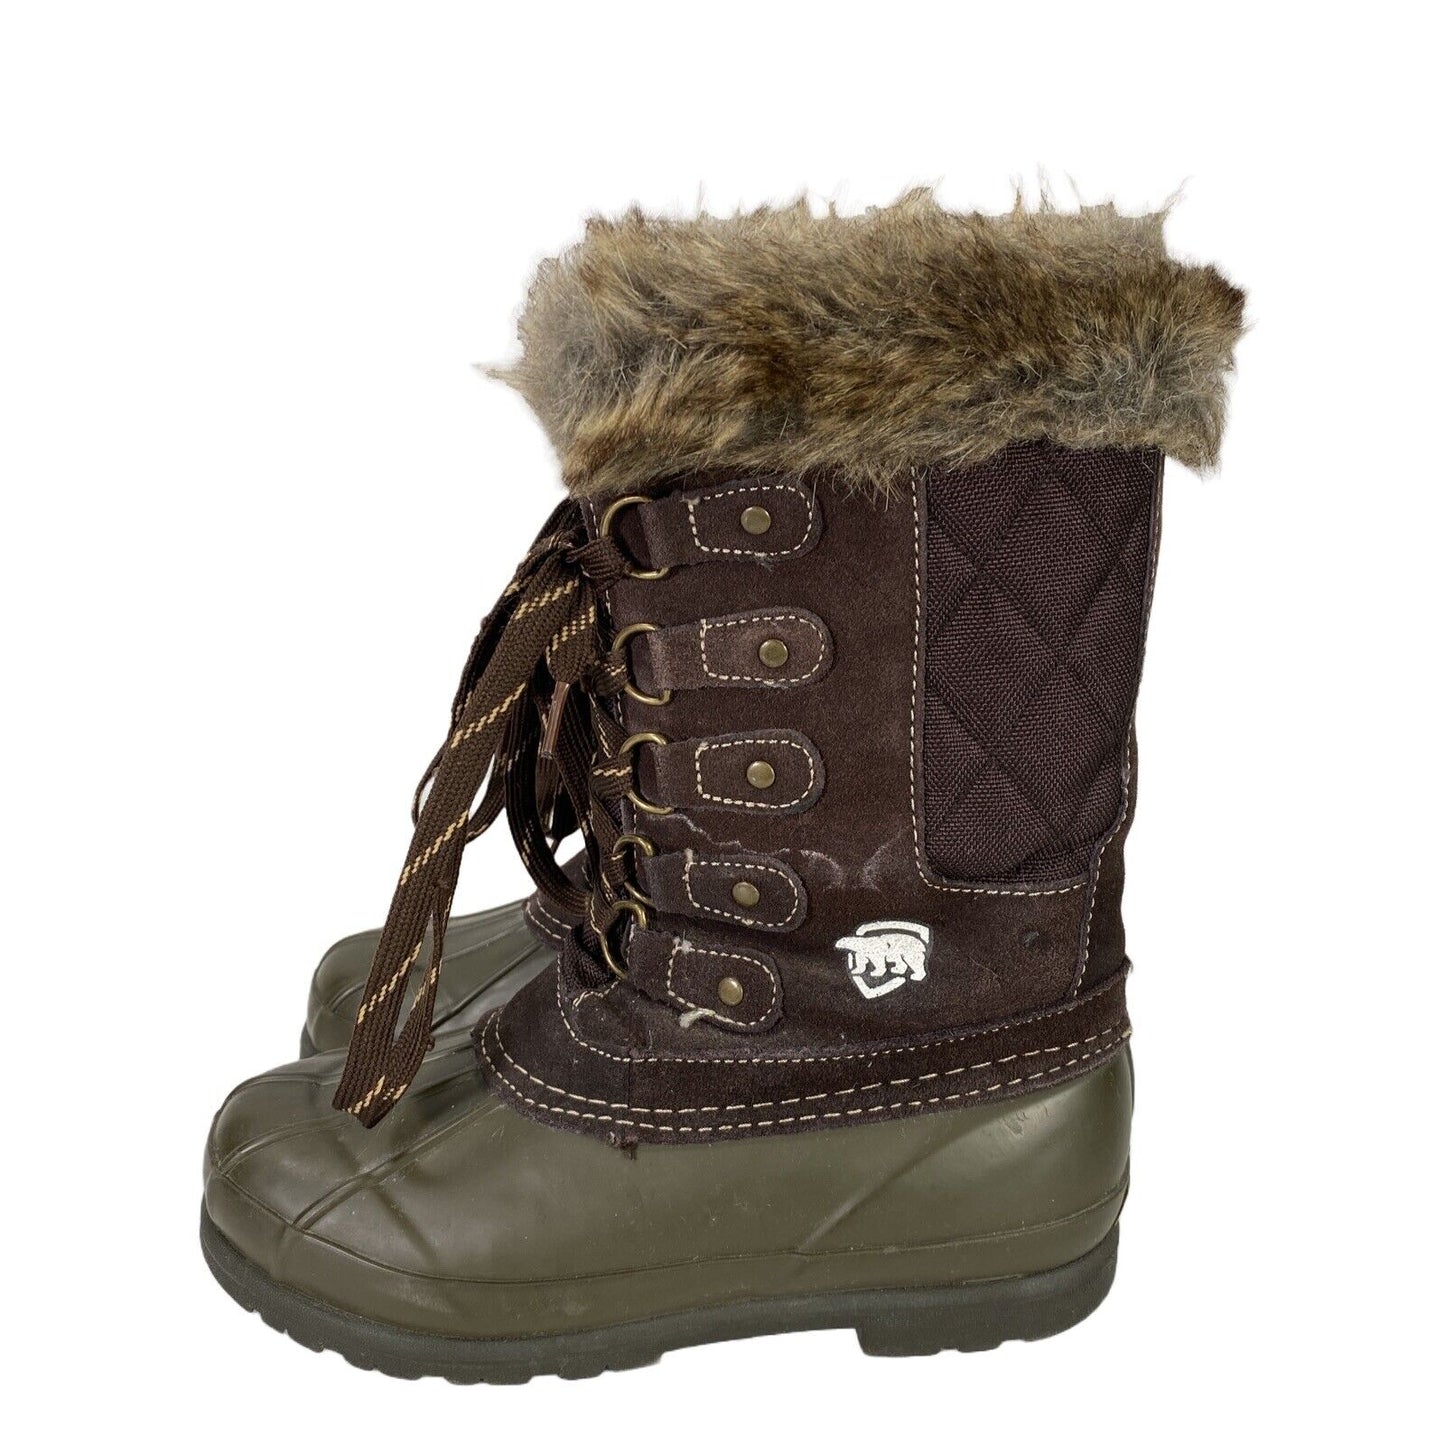 Arctic Shied Women's Brown Suede Lace Up Winter Snow Boots - 6M